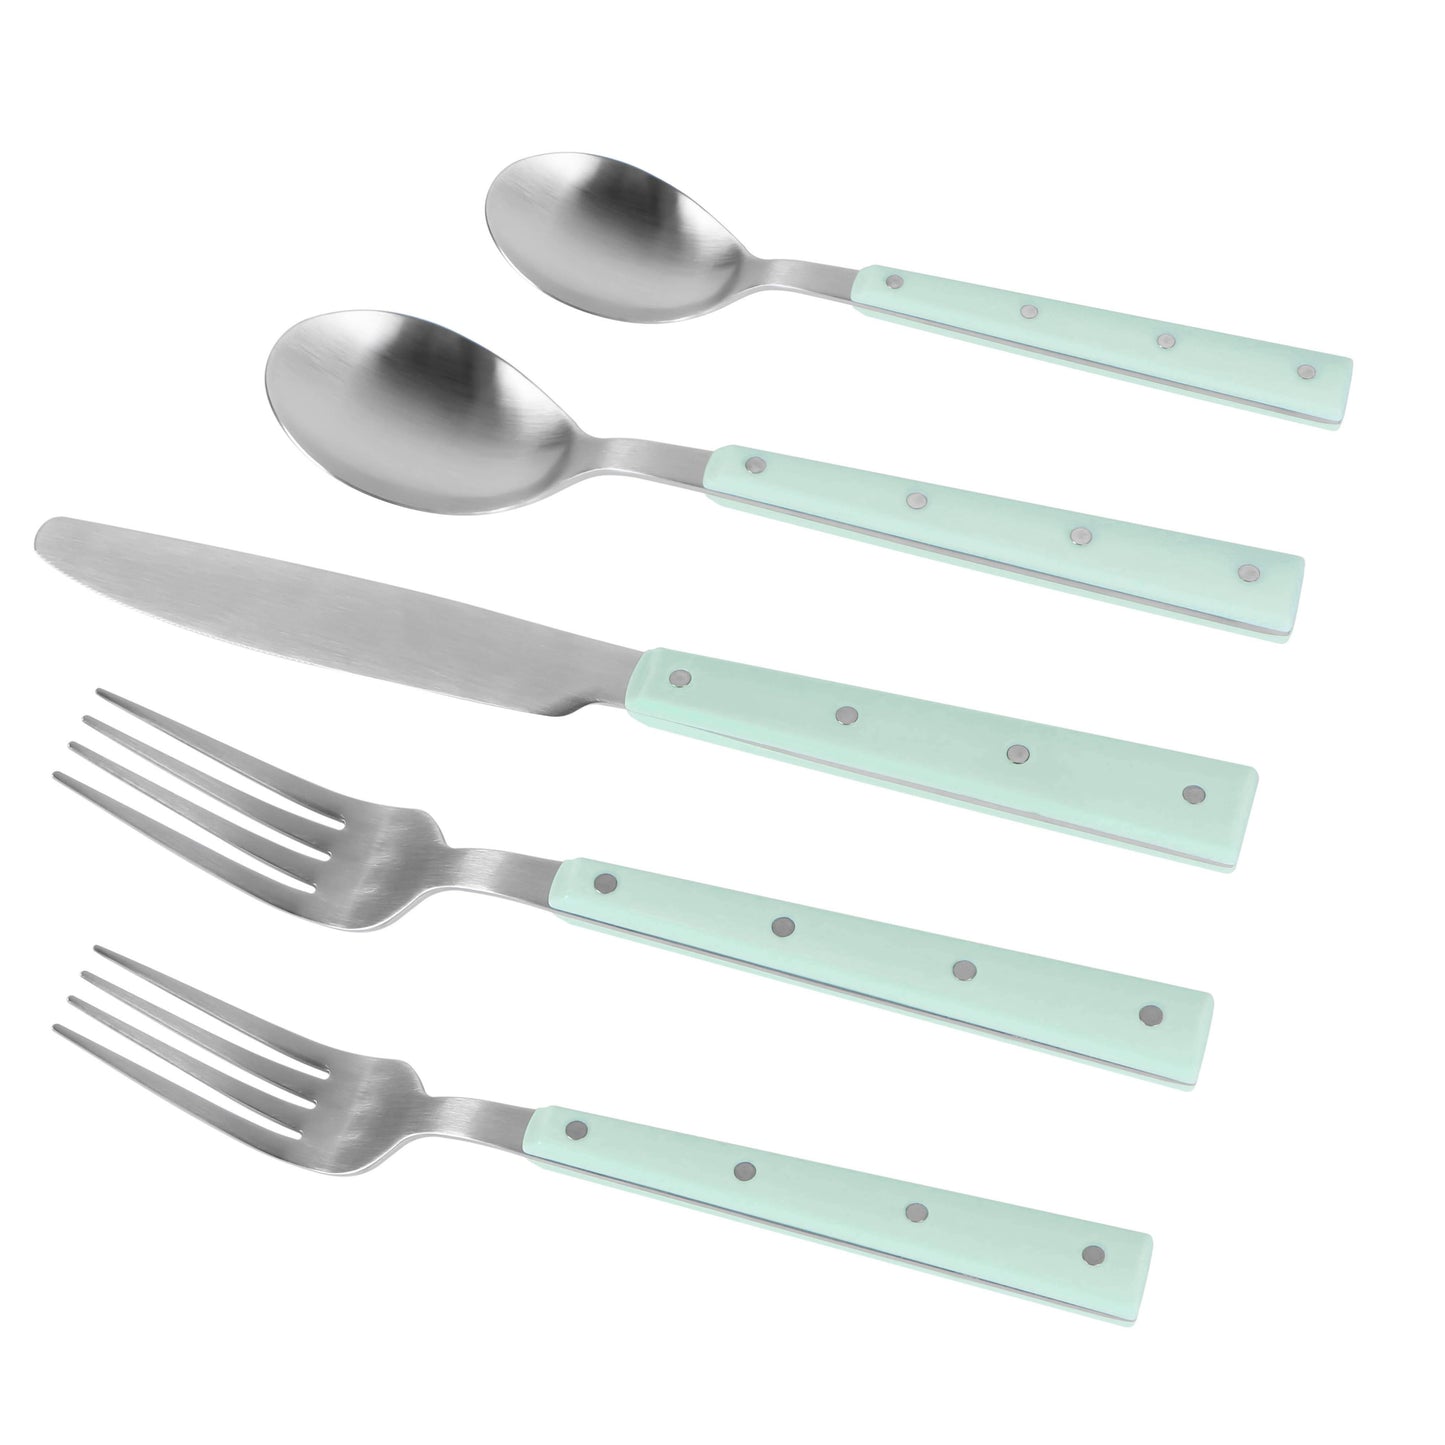 bryn mint and stainless steel flatware - set of 5 pieces - service for 1